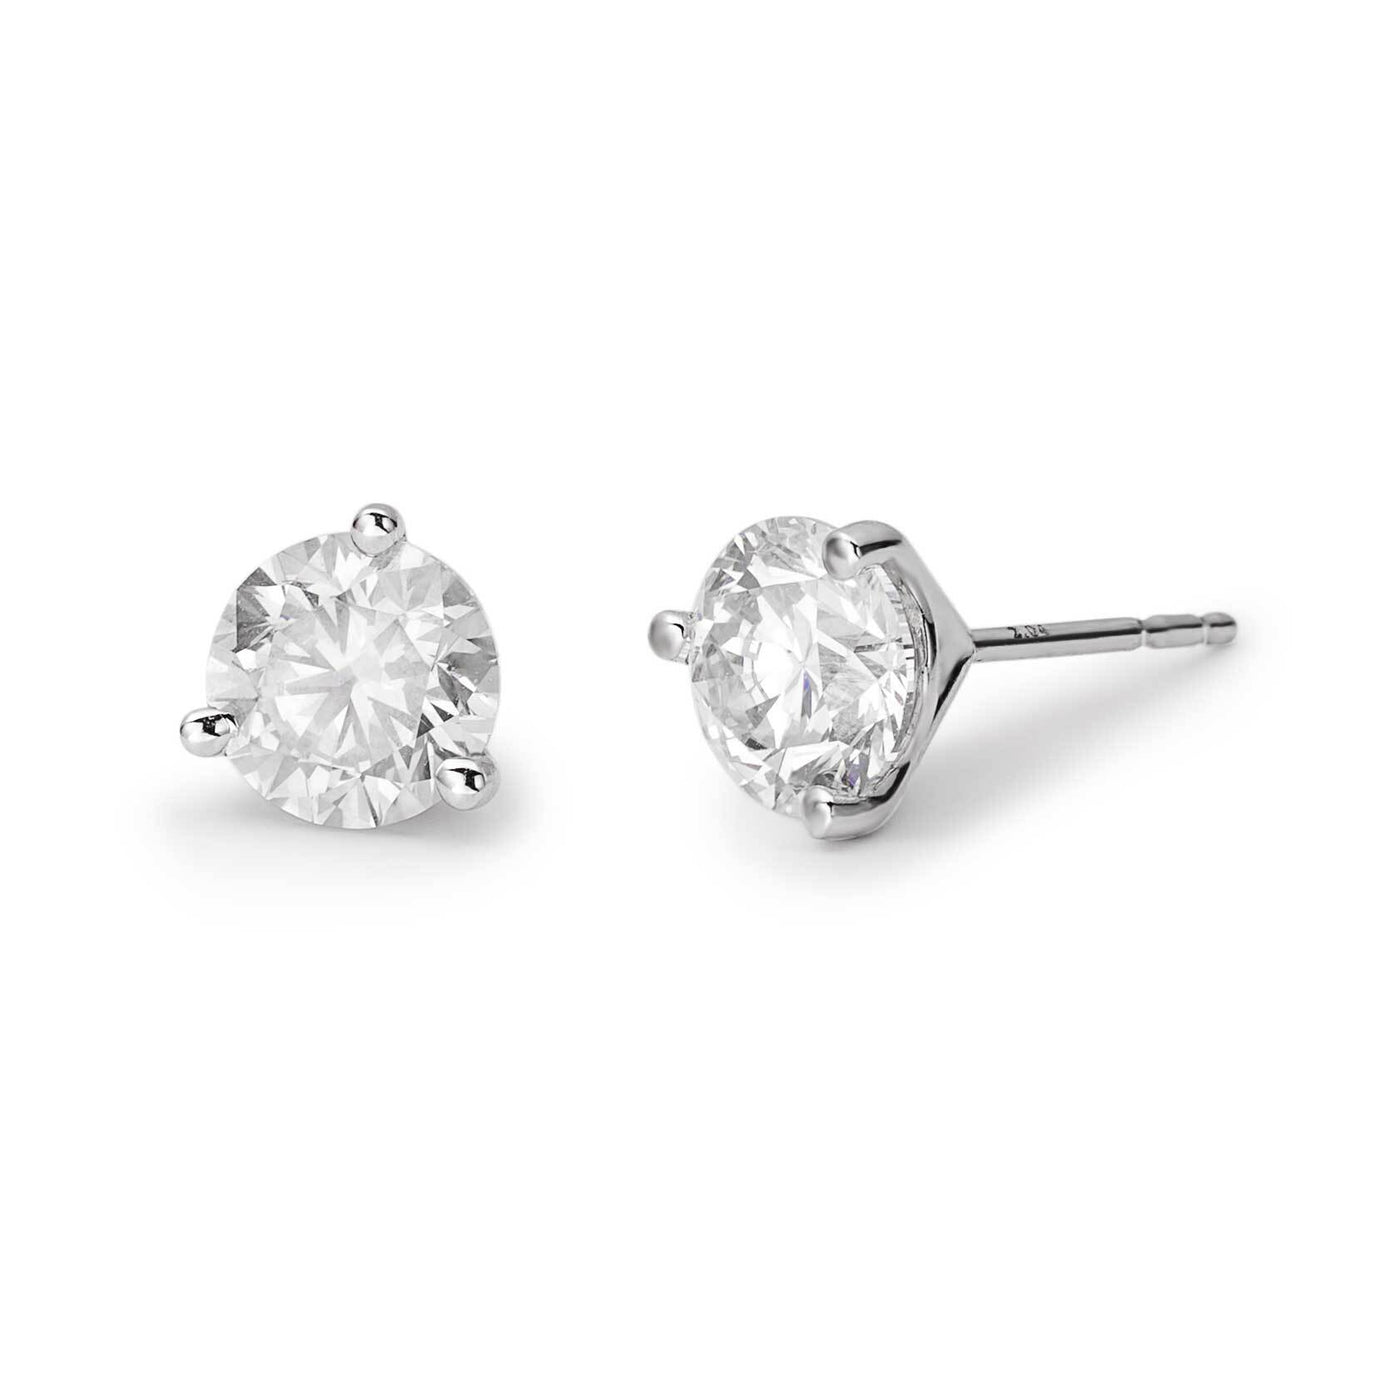 Round Cut Solitaire Diamond Stud Earrings 2.03ctw 14K White Gold